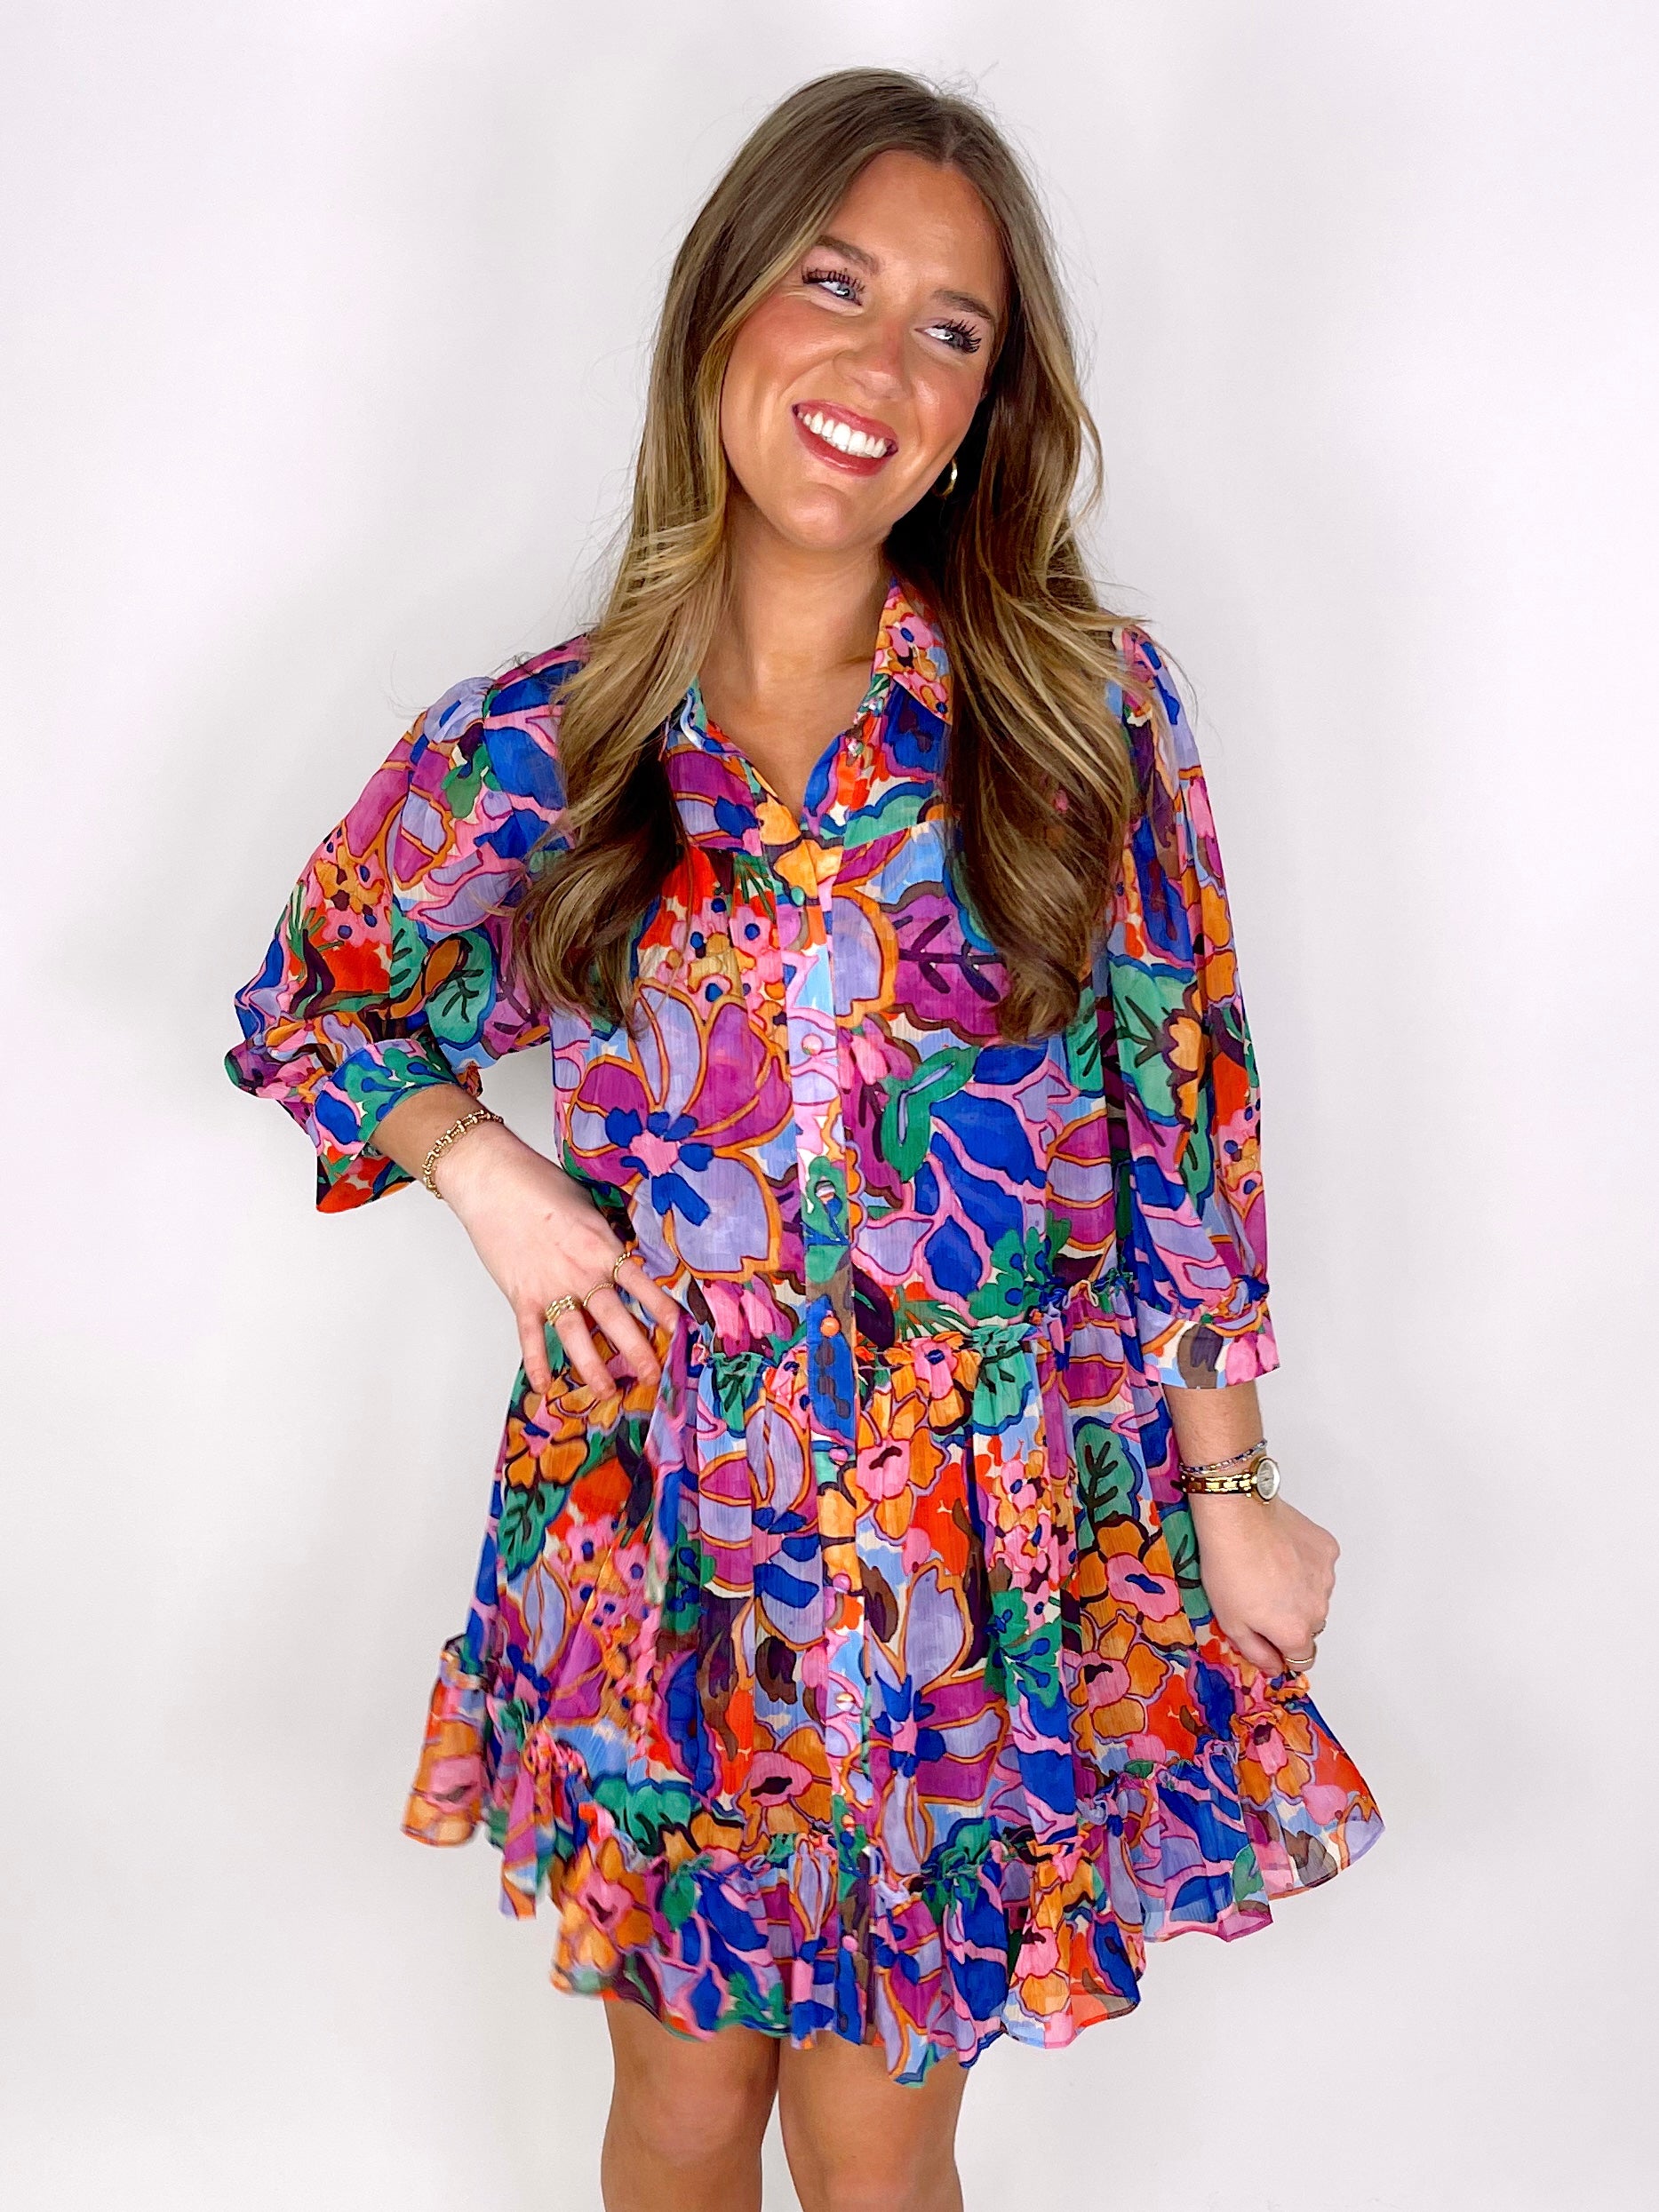 The Ronnie Dress-Mini Dress-THML-The Village Shoppe, Women’s Fashion Boutique, Shop Online and In Store - Located in Muscle Shoals, AL.